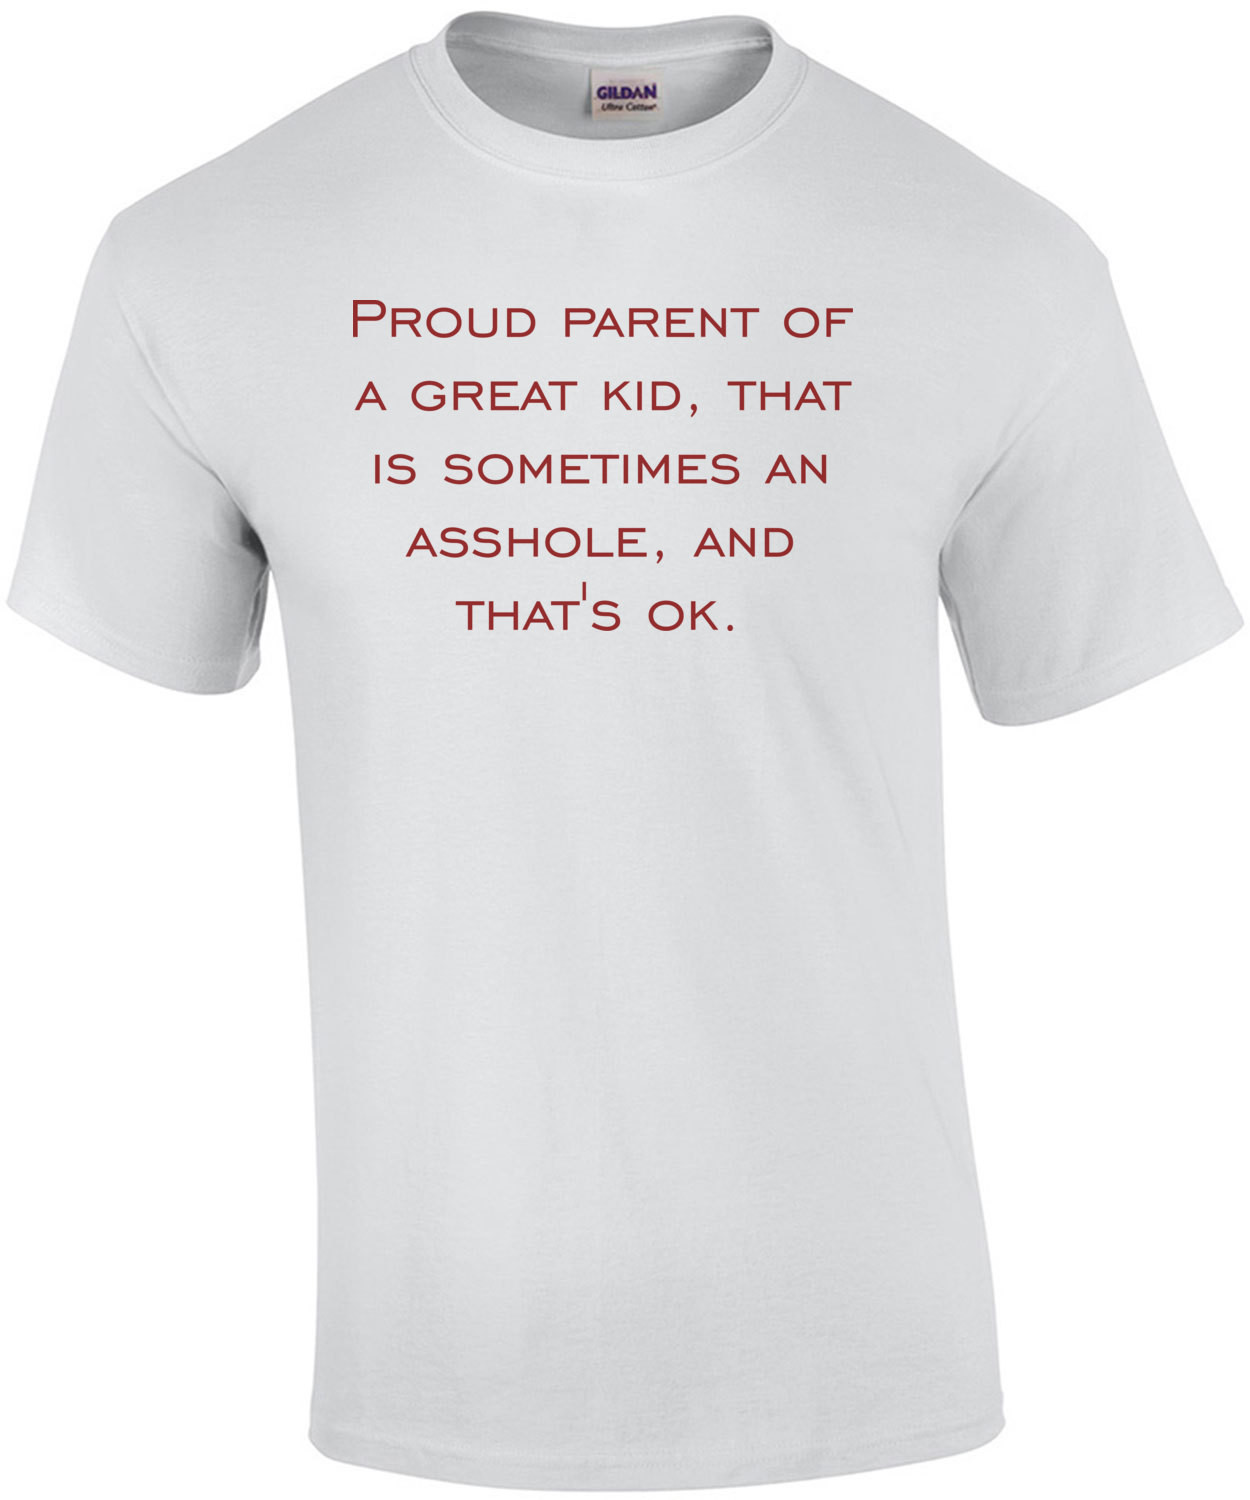 Proud parent of a great kid that is sometimes an asshole and that's ok - funny t-shirt